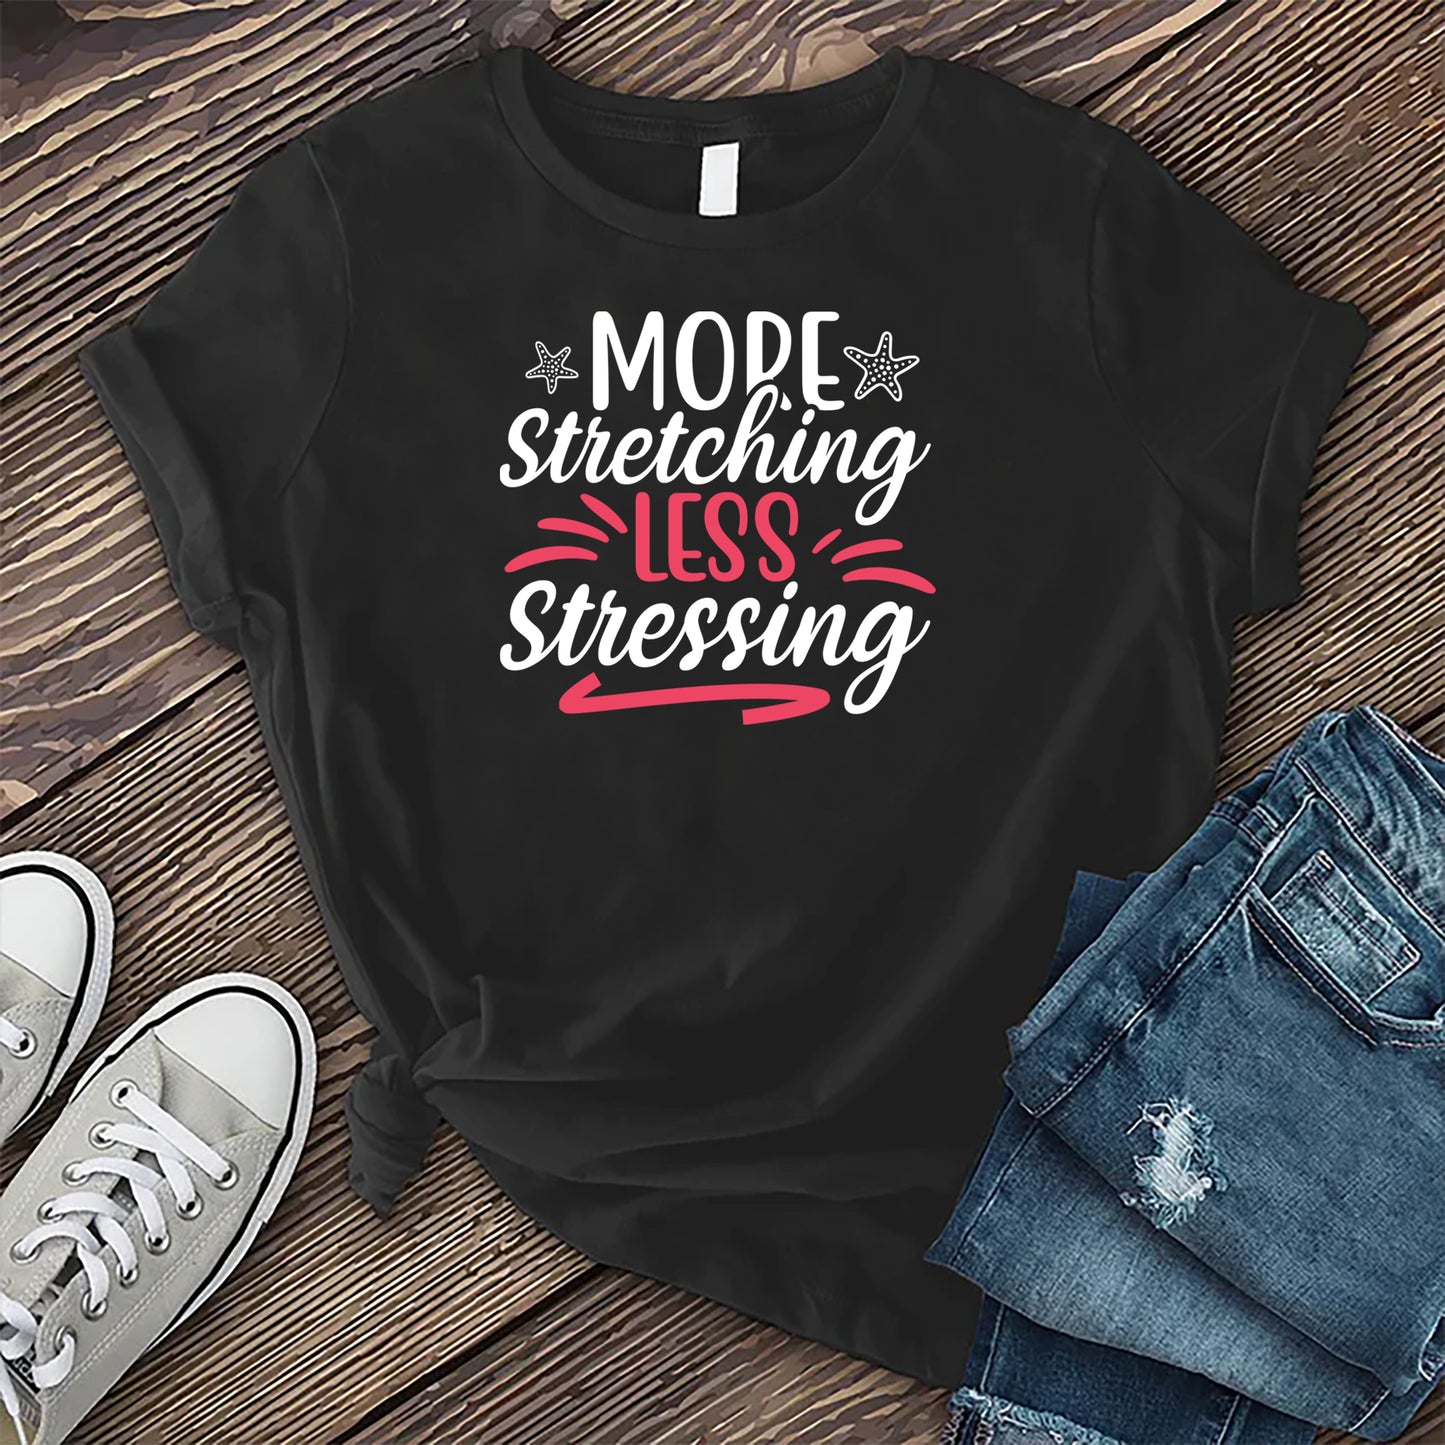 More Stretching Less Stressing T-shirt